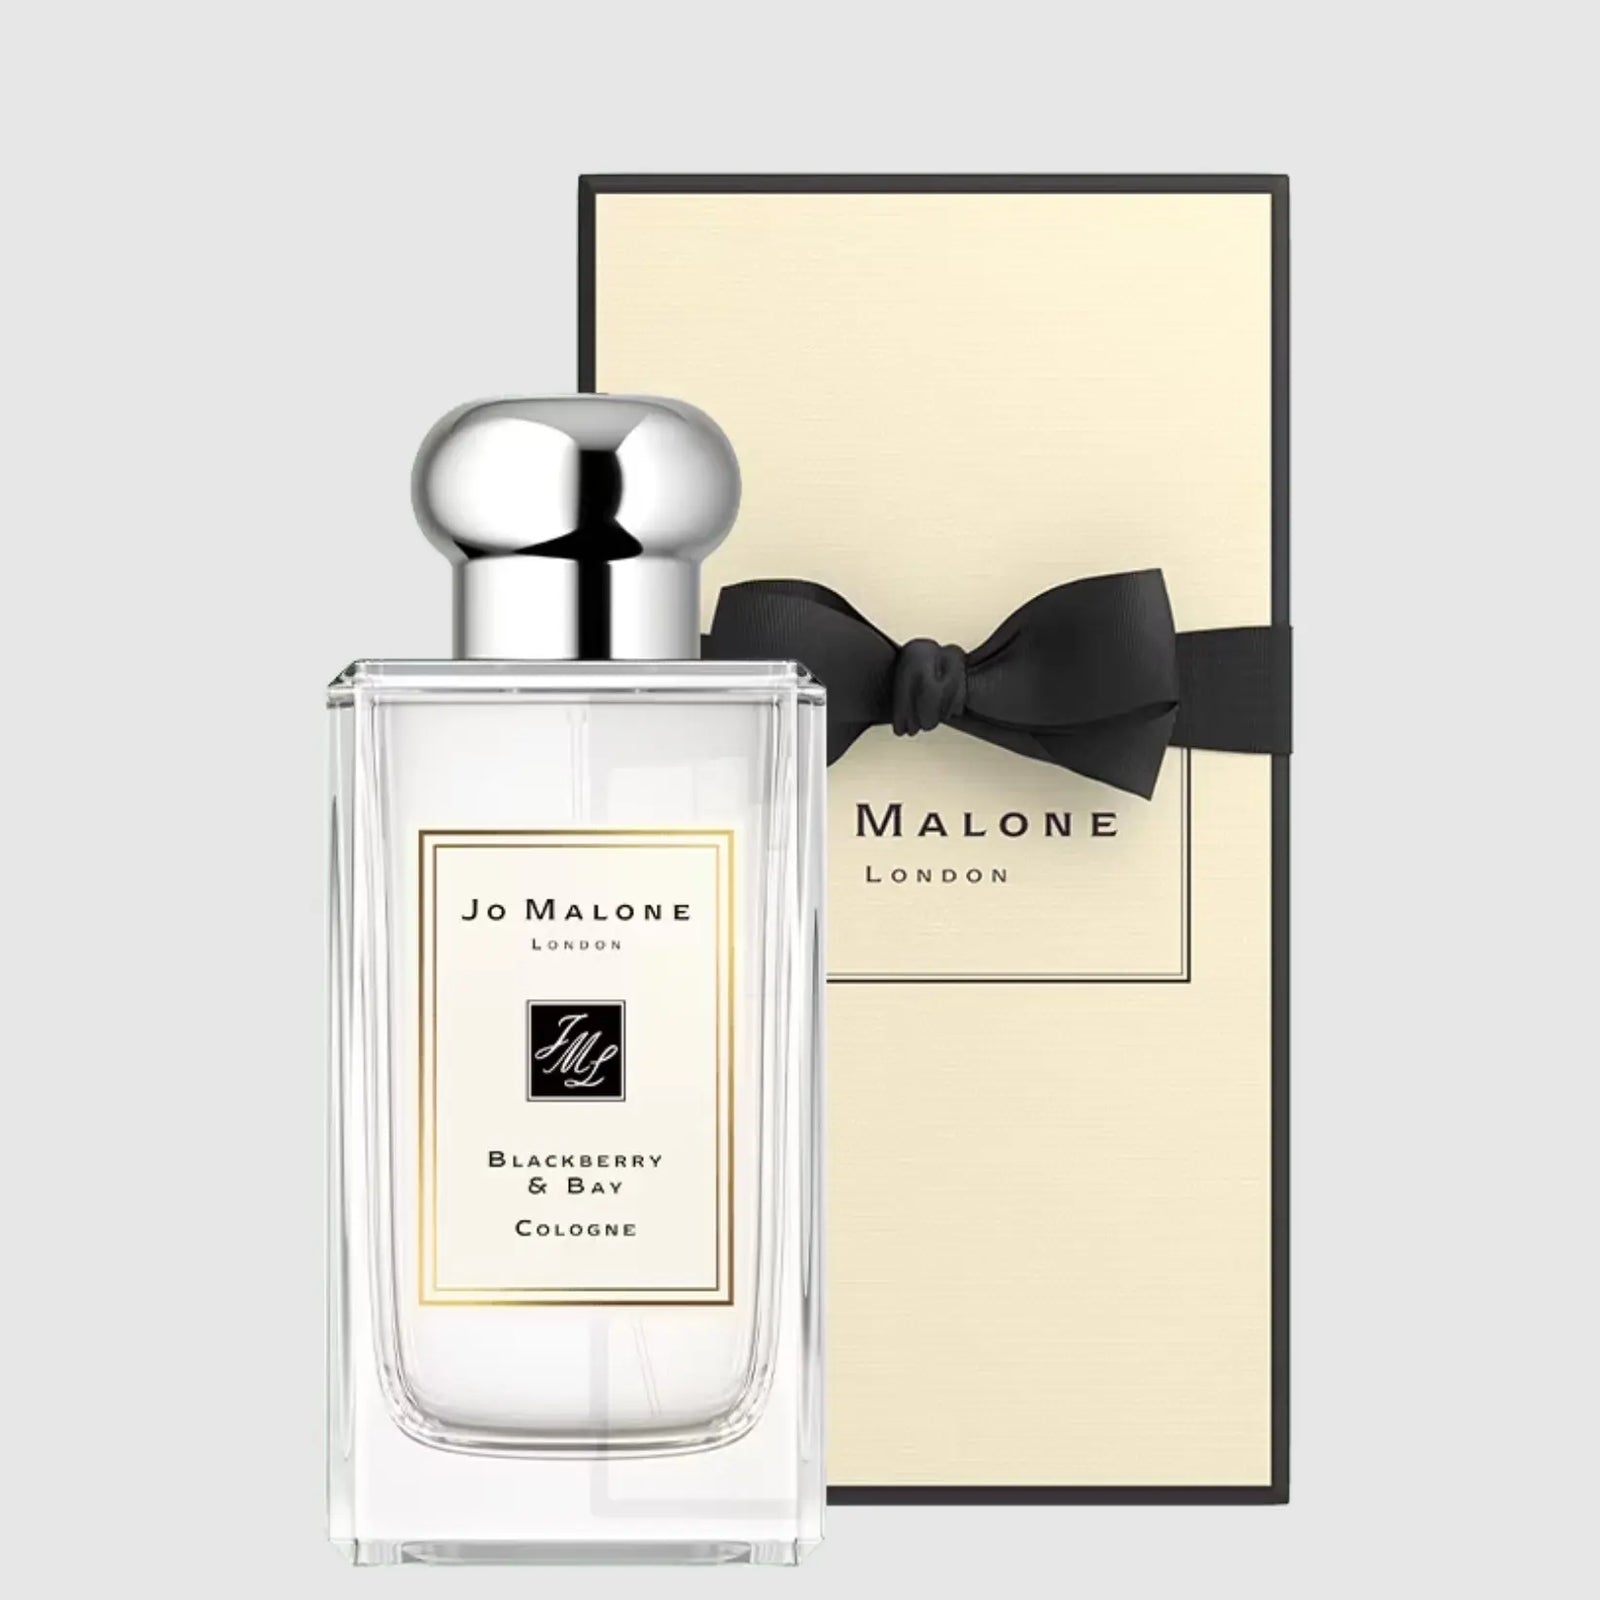 Jo Malone London Blackberry & Bay Cologne For Women 100ml Imported Perfumes & Beauty Store